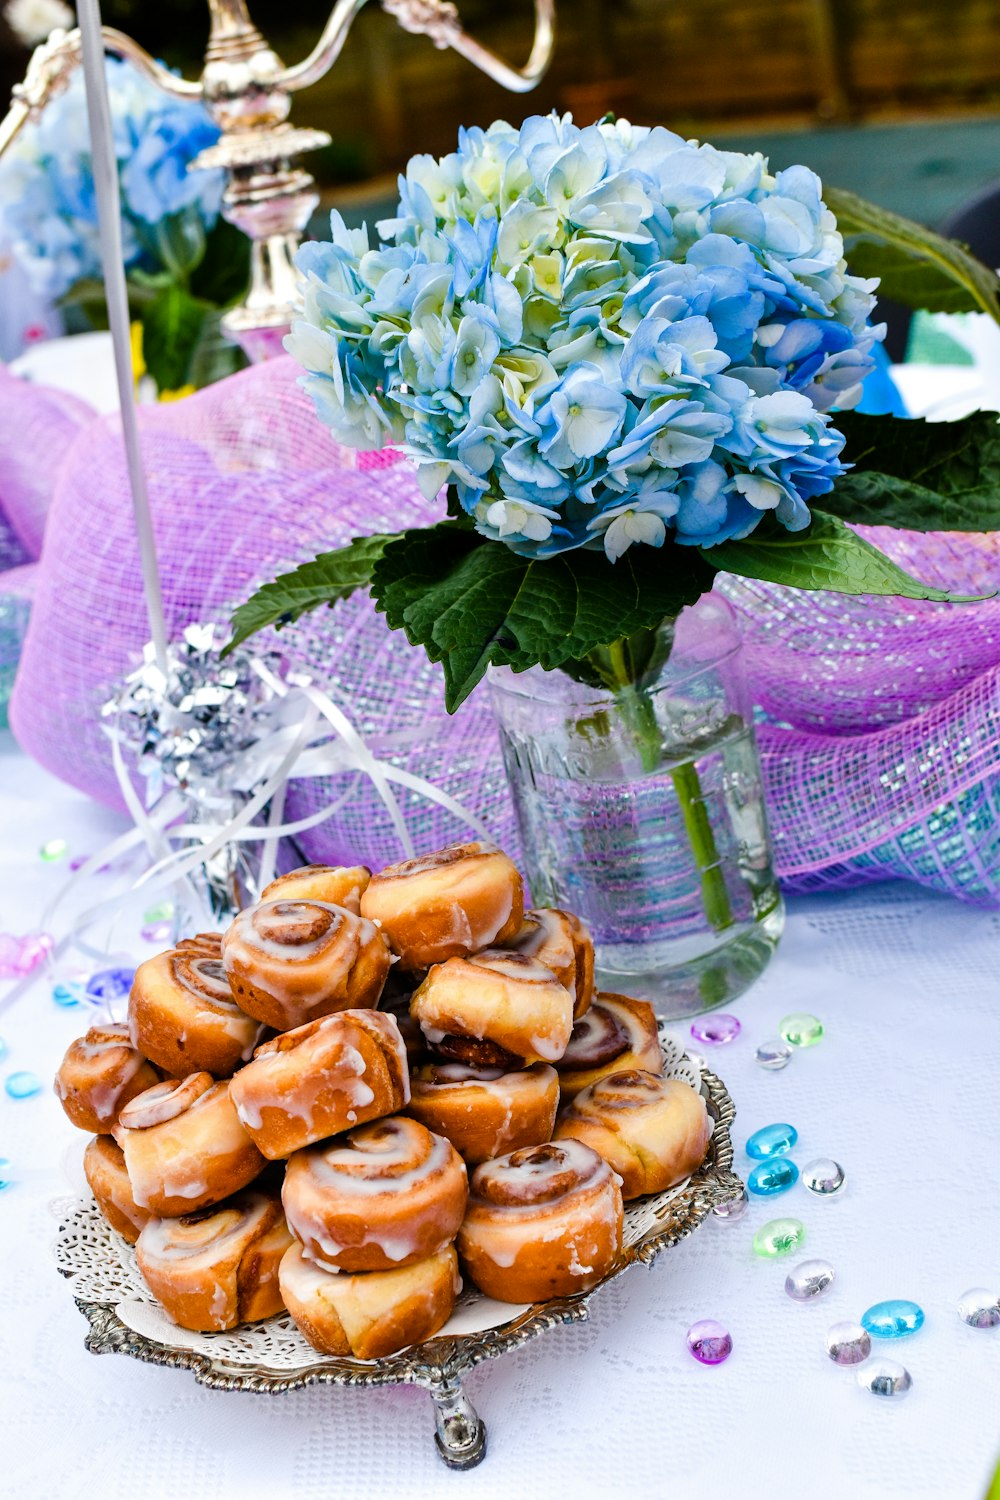 a plate of doughnuts sitting on a table